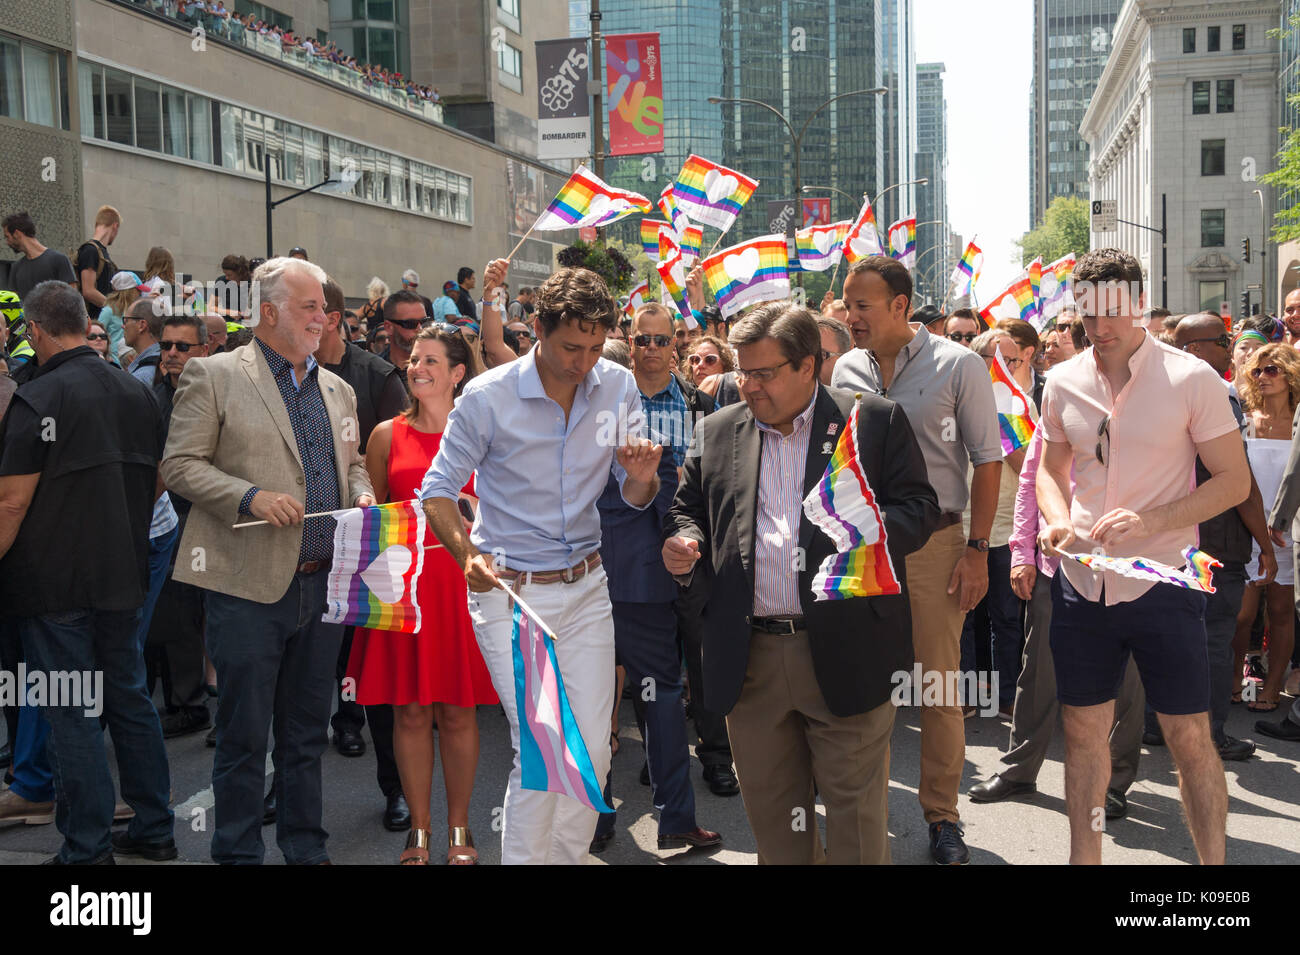 Canadian PM Justin Trudeau, Montreal Mayor Denis Coderre, Ireland PM Leo Varadkar and Quebec PM Philippe Couillard take part in Montreal Pride Parade  Stock Photo